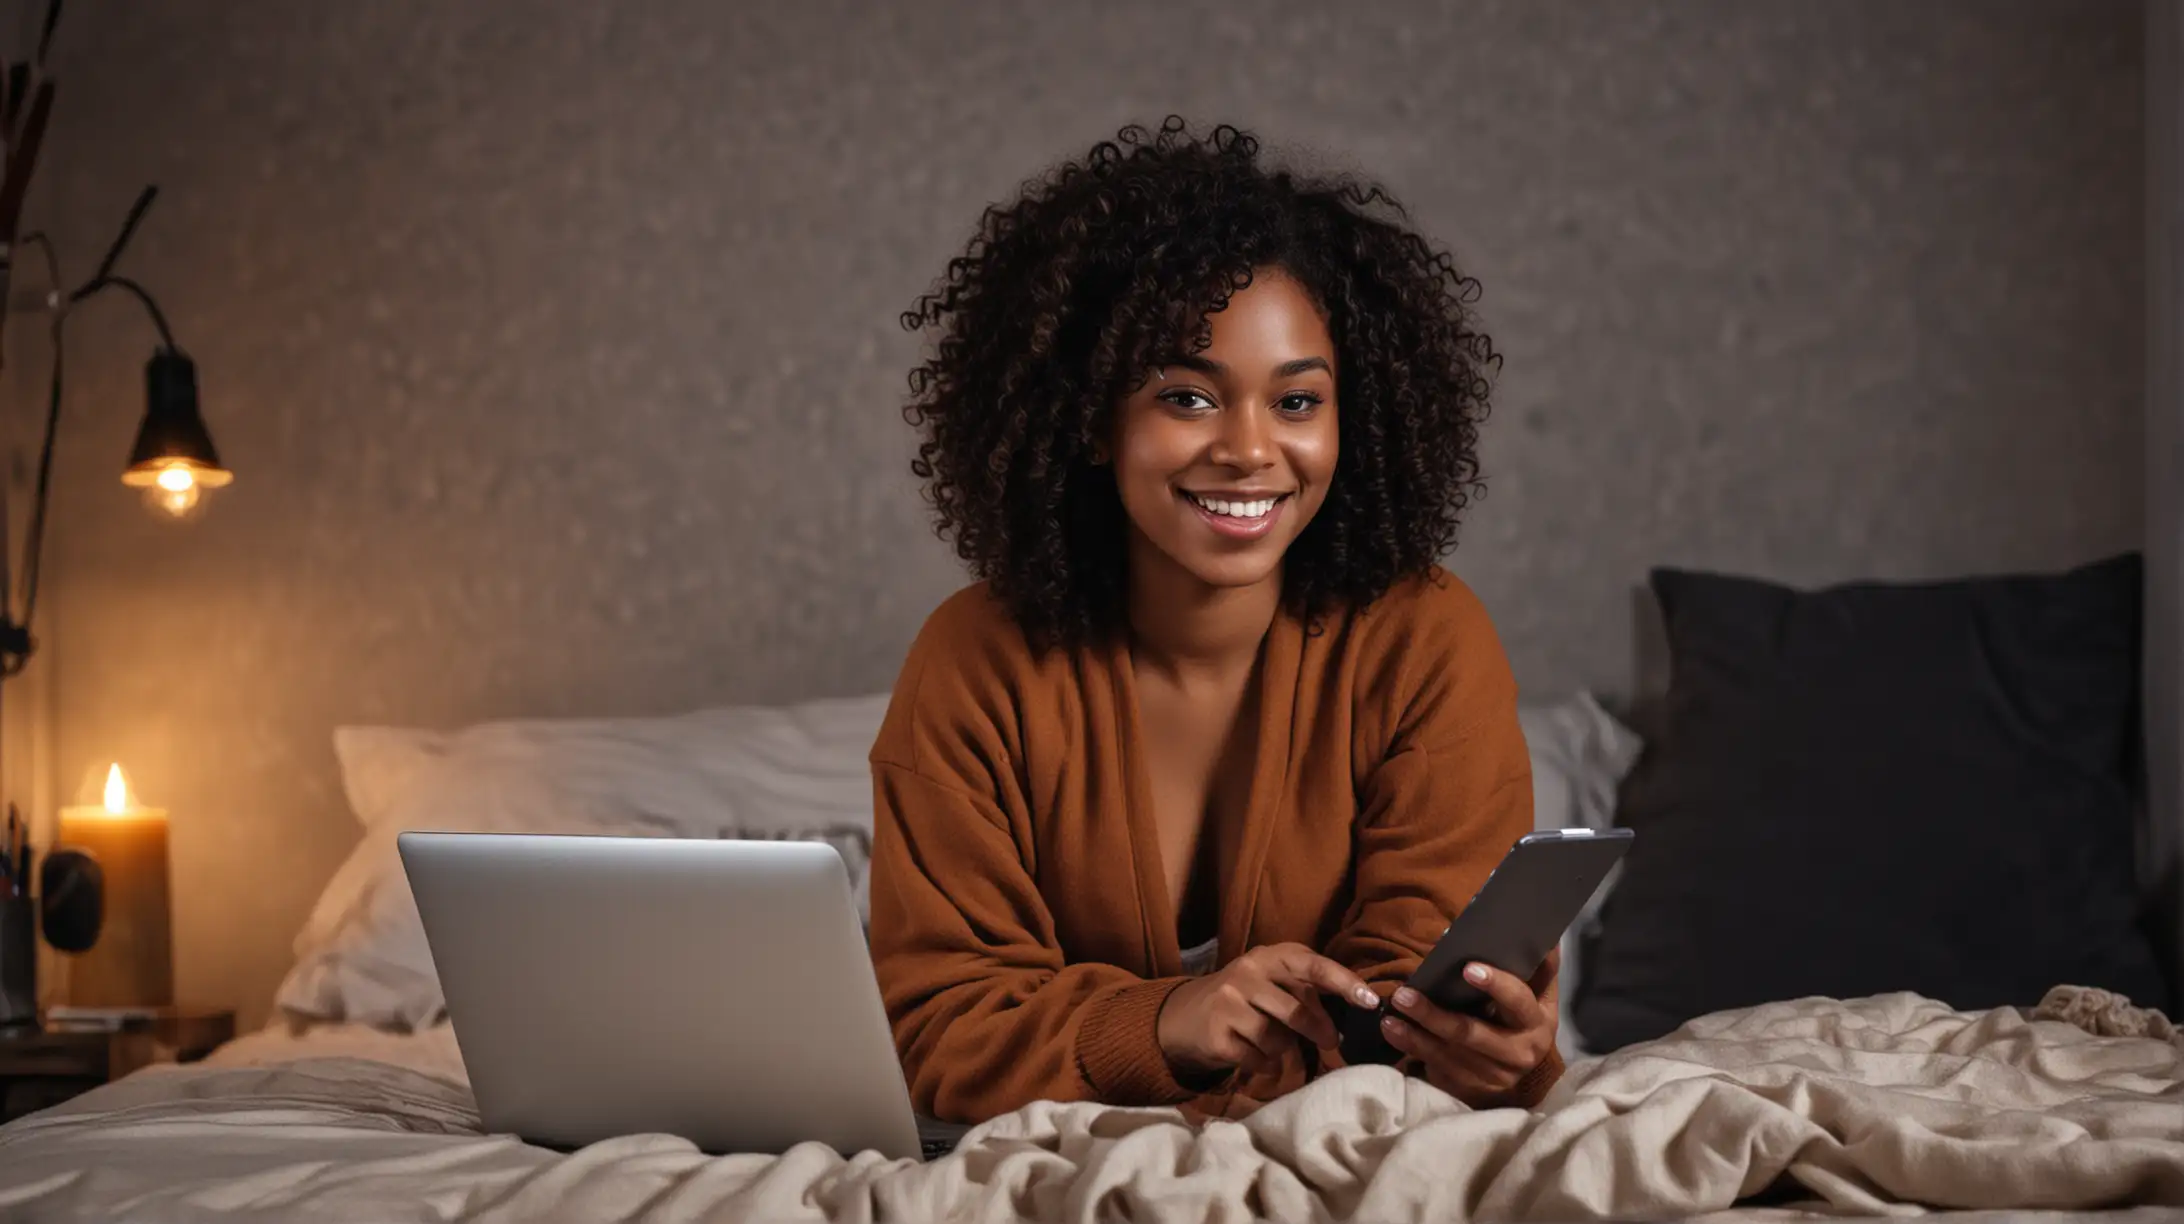 Happy Black Girl with Curly Hair Using Laptop in Cozy Room